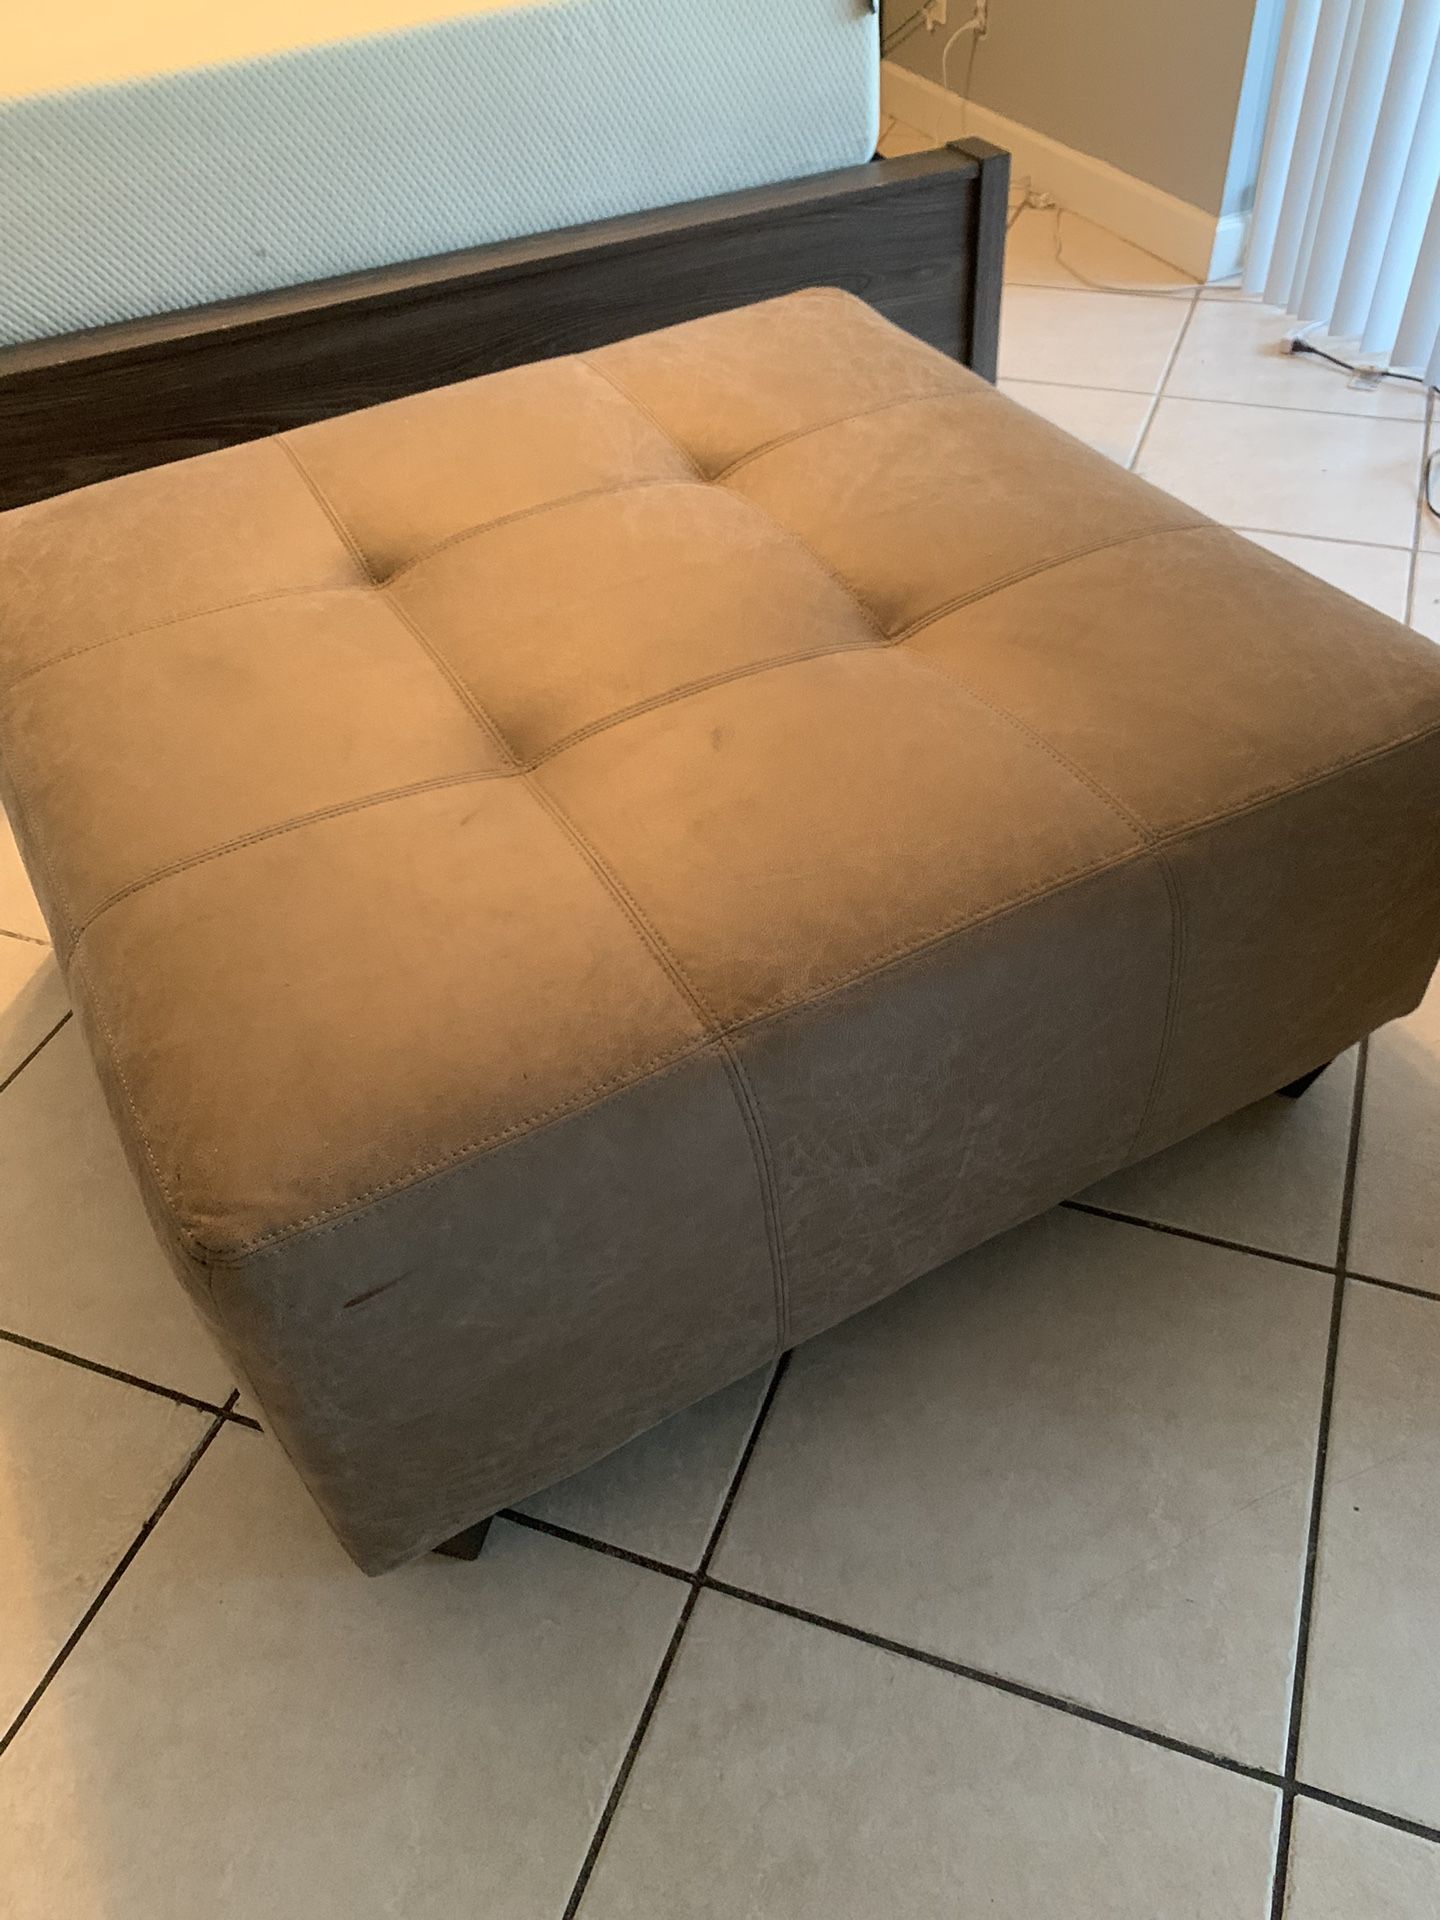 3‘3“ By 3‘3“ Coffee Tables/Ottoman 